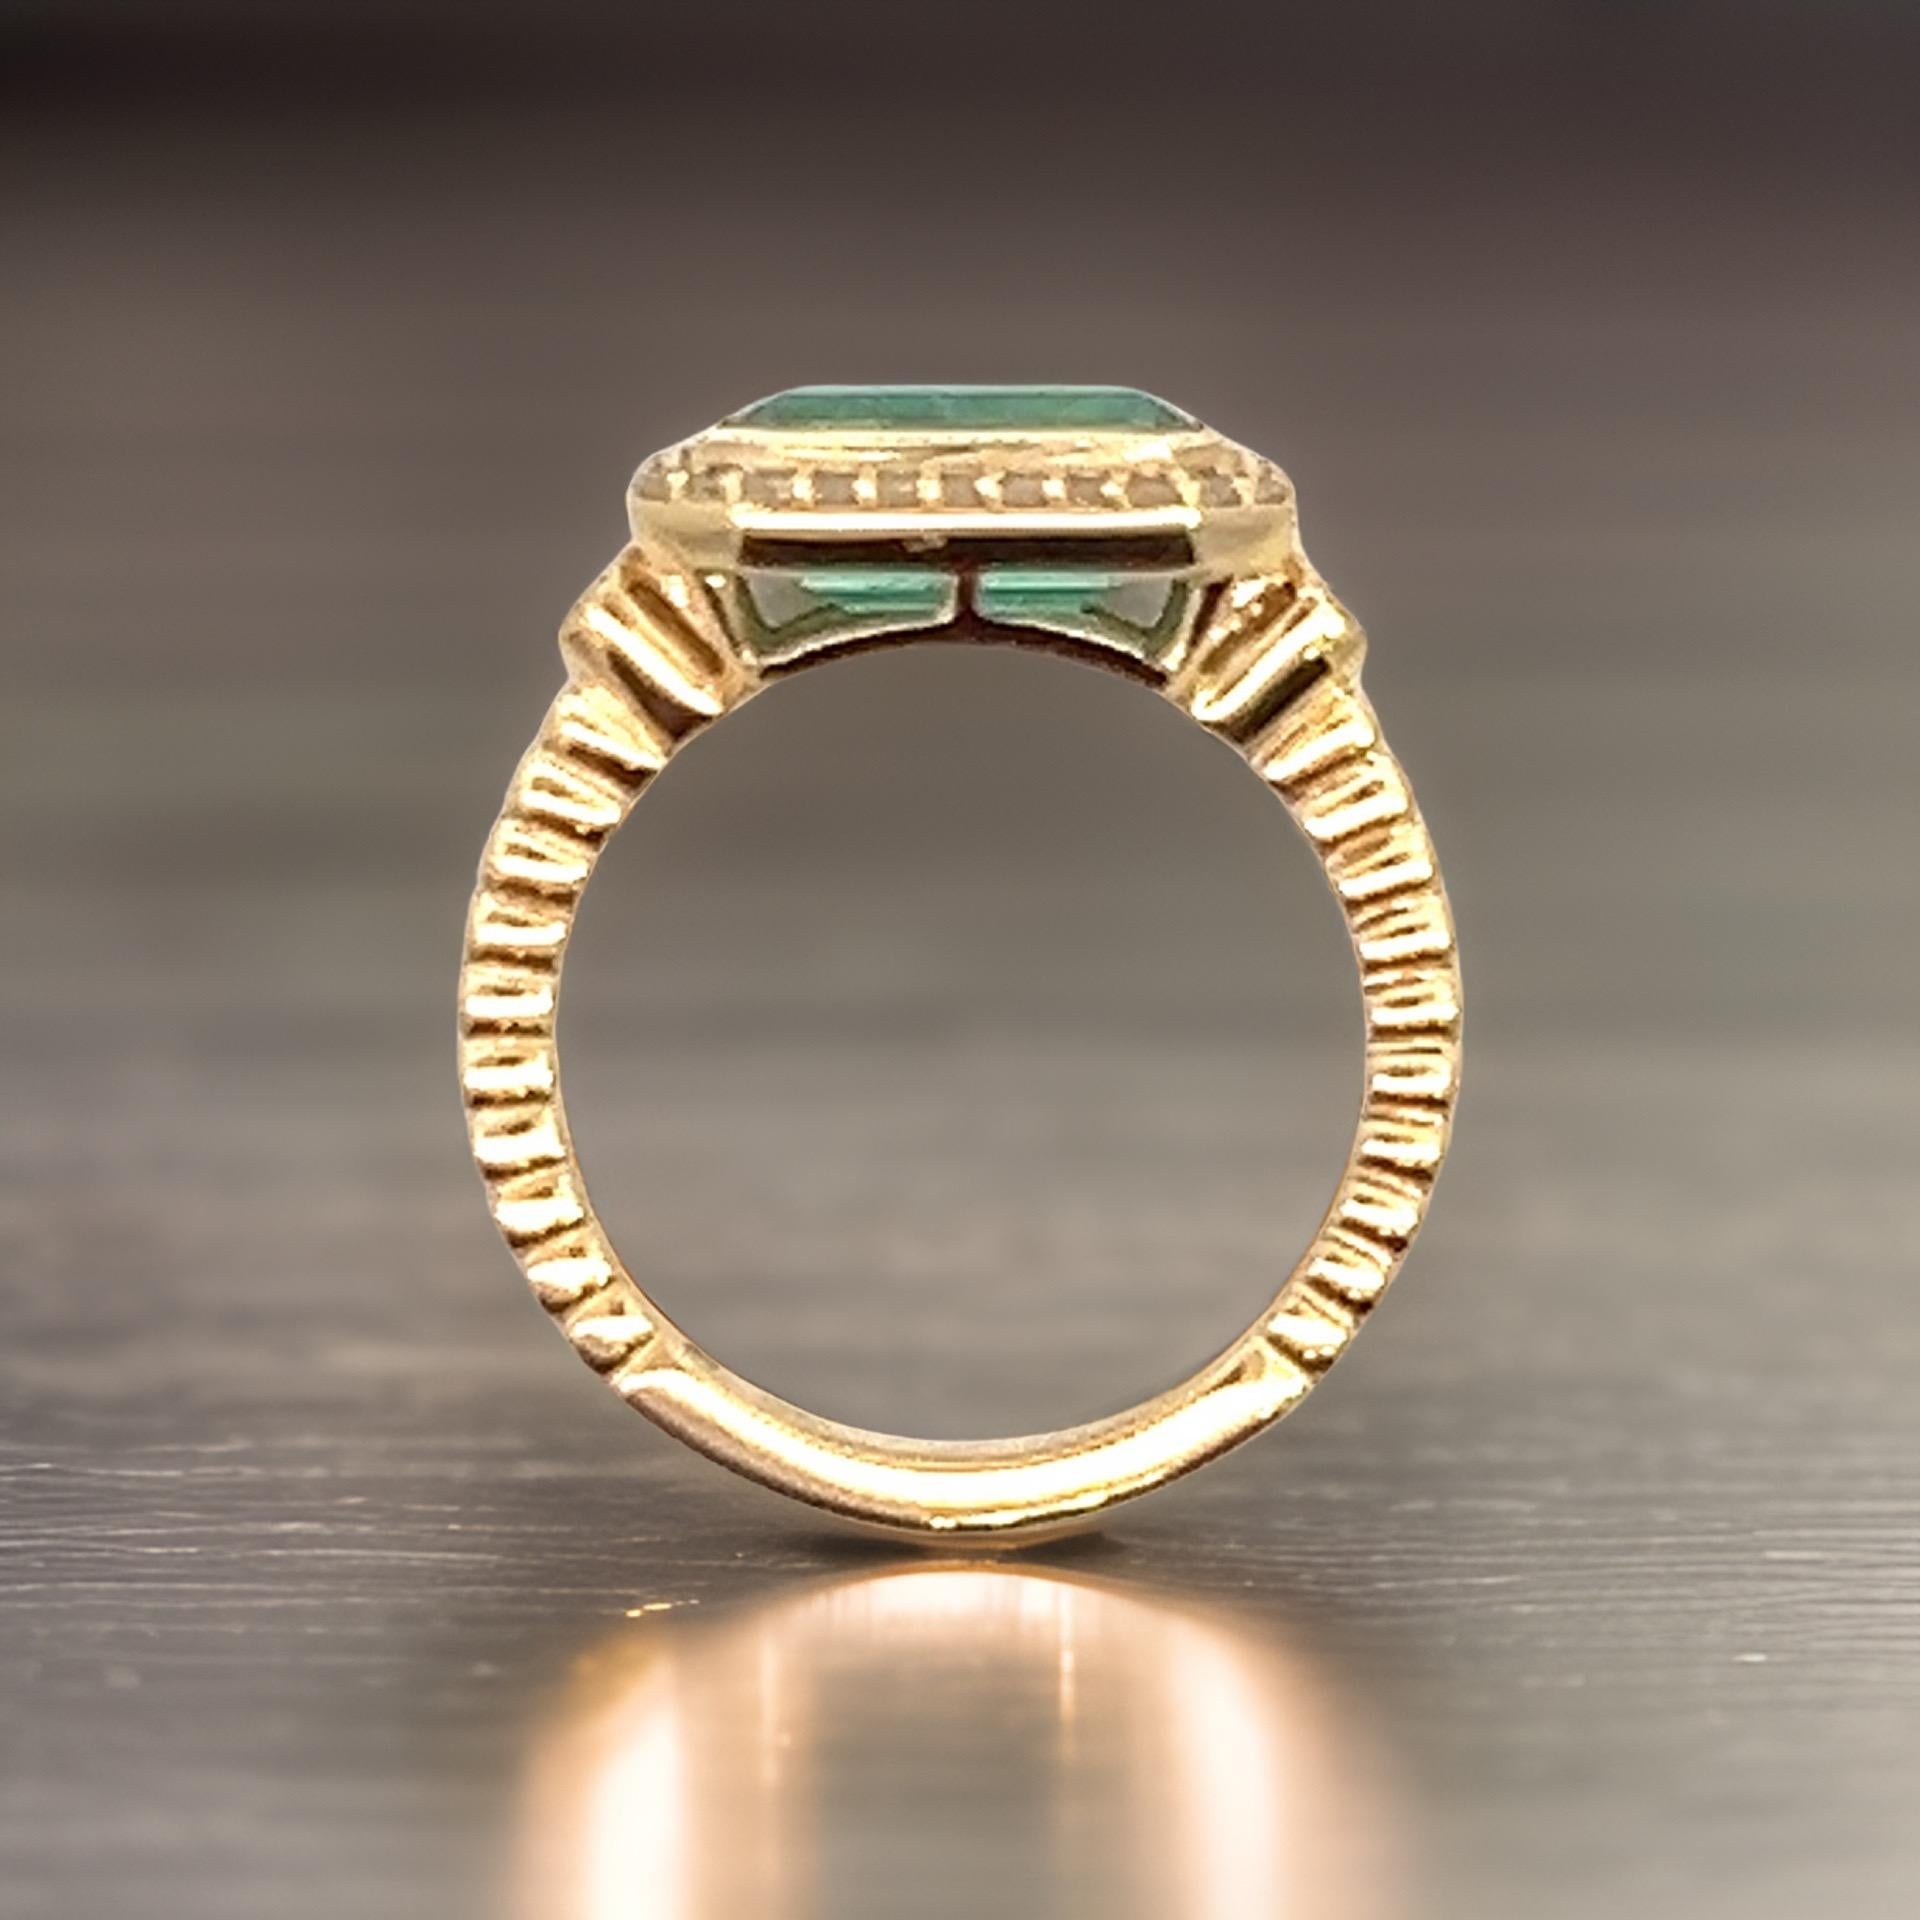 Natural Emerald and Diamond Ring 6.5 14k Y Gold 2.32 TCW Certified For Sale 2